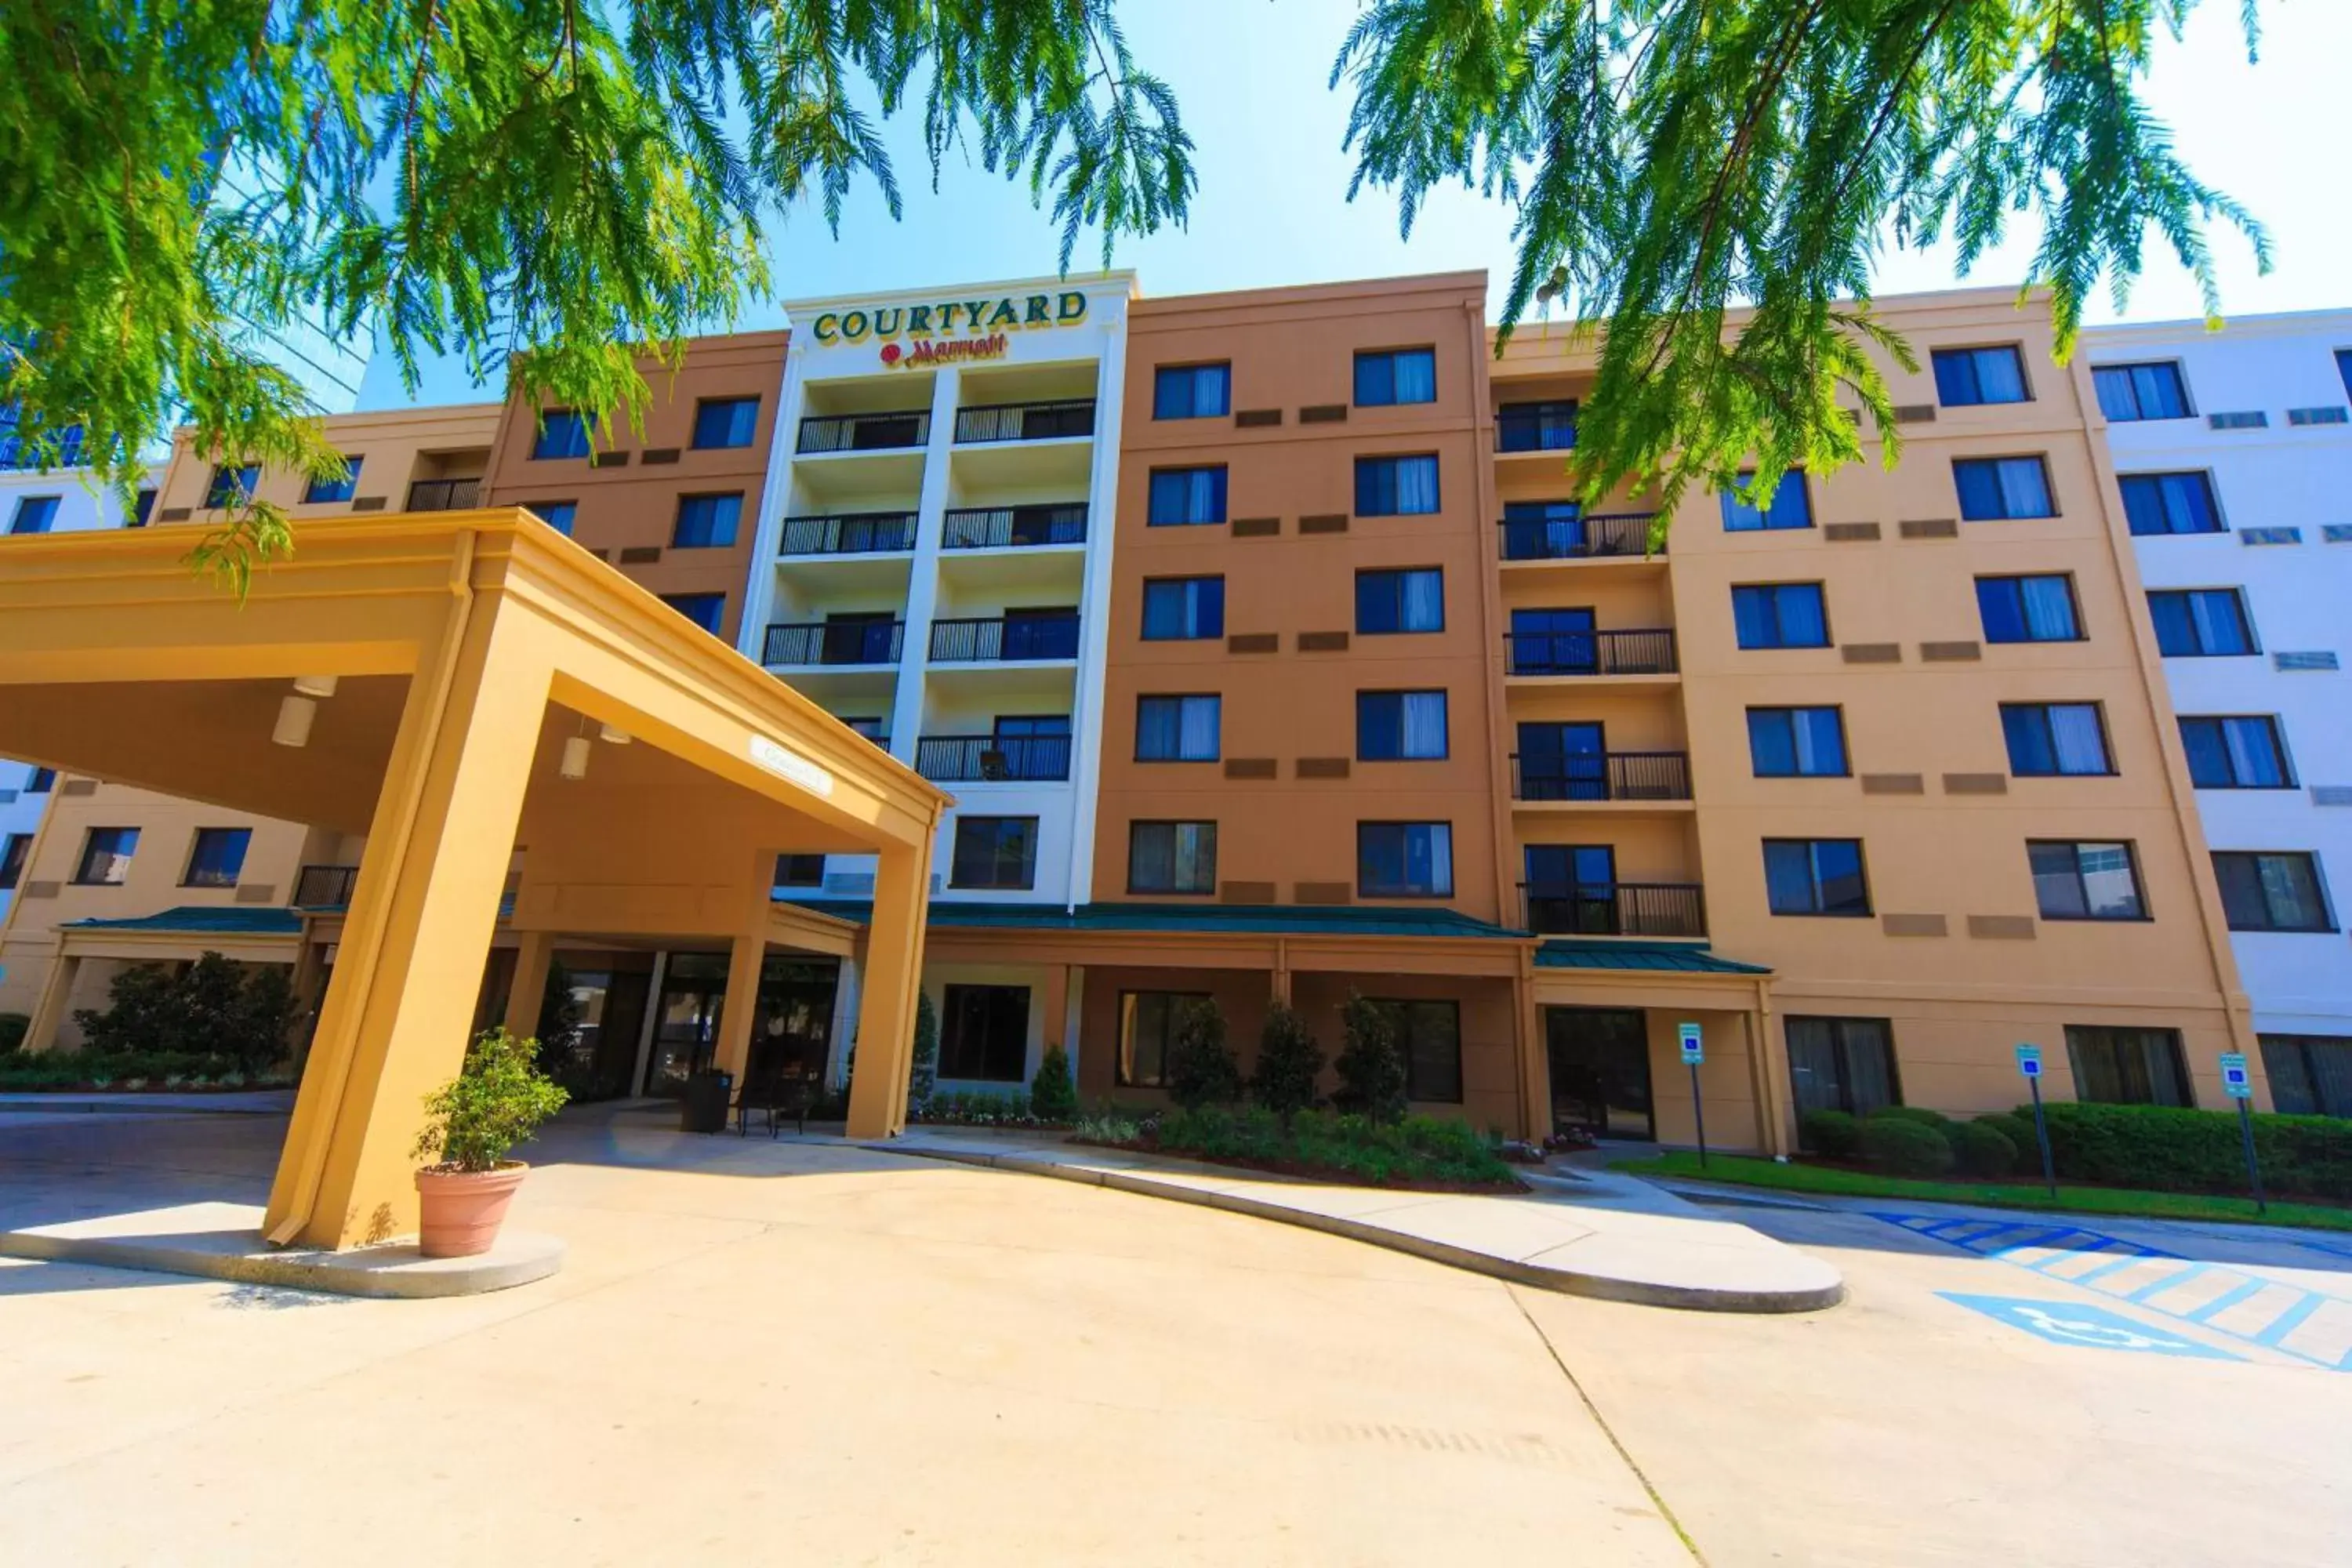 Property Building in Courtyard by Marriott New Orleans Metairie